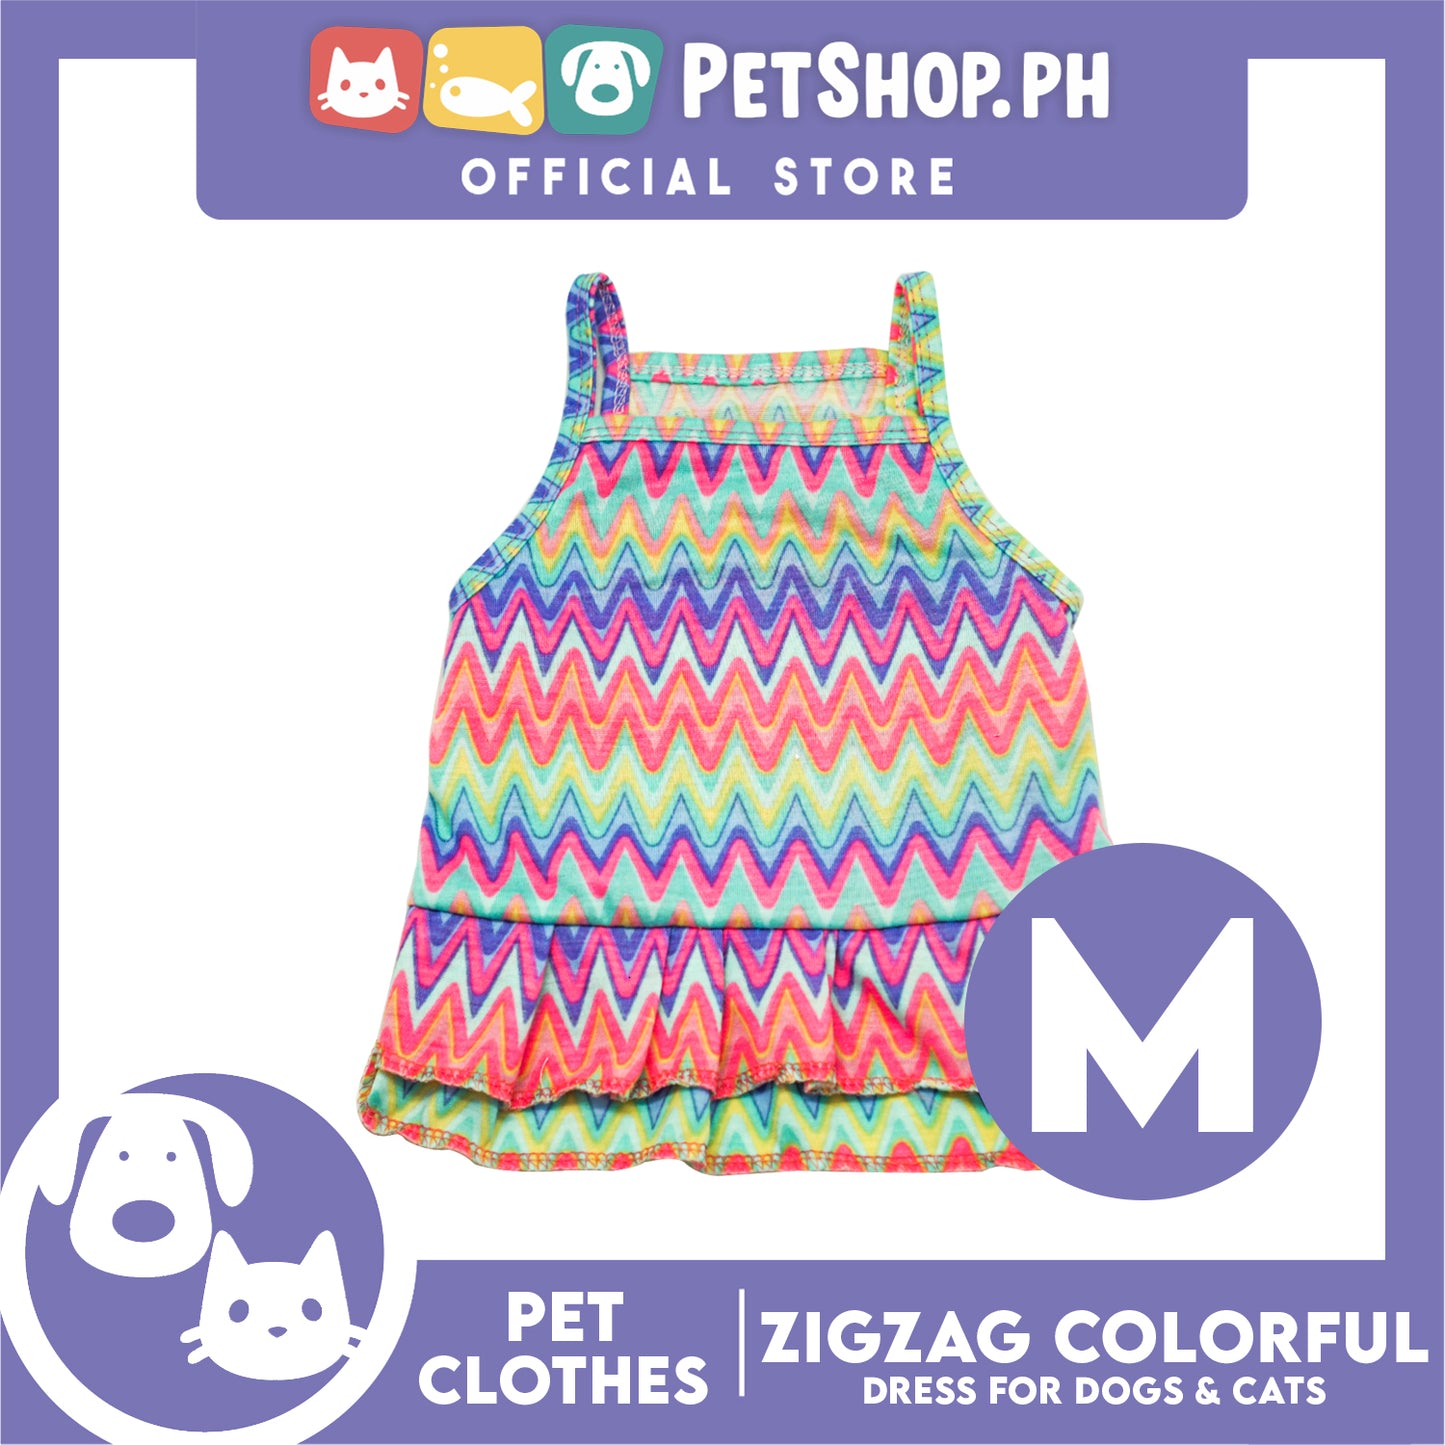 Pet Dress Zigzag Colorful Abstract Dress (Medium) Suitable for Dogs and Cats